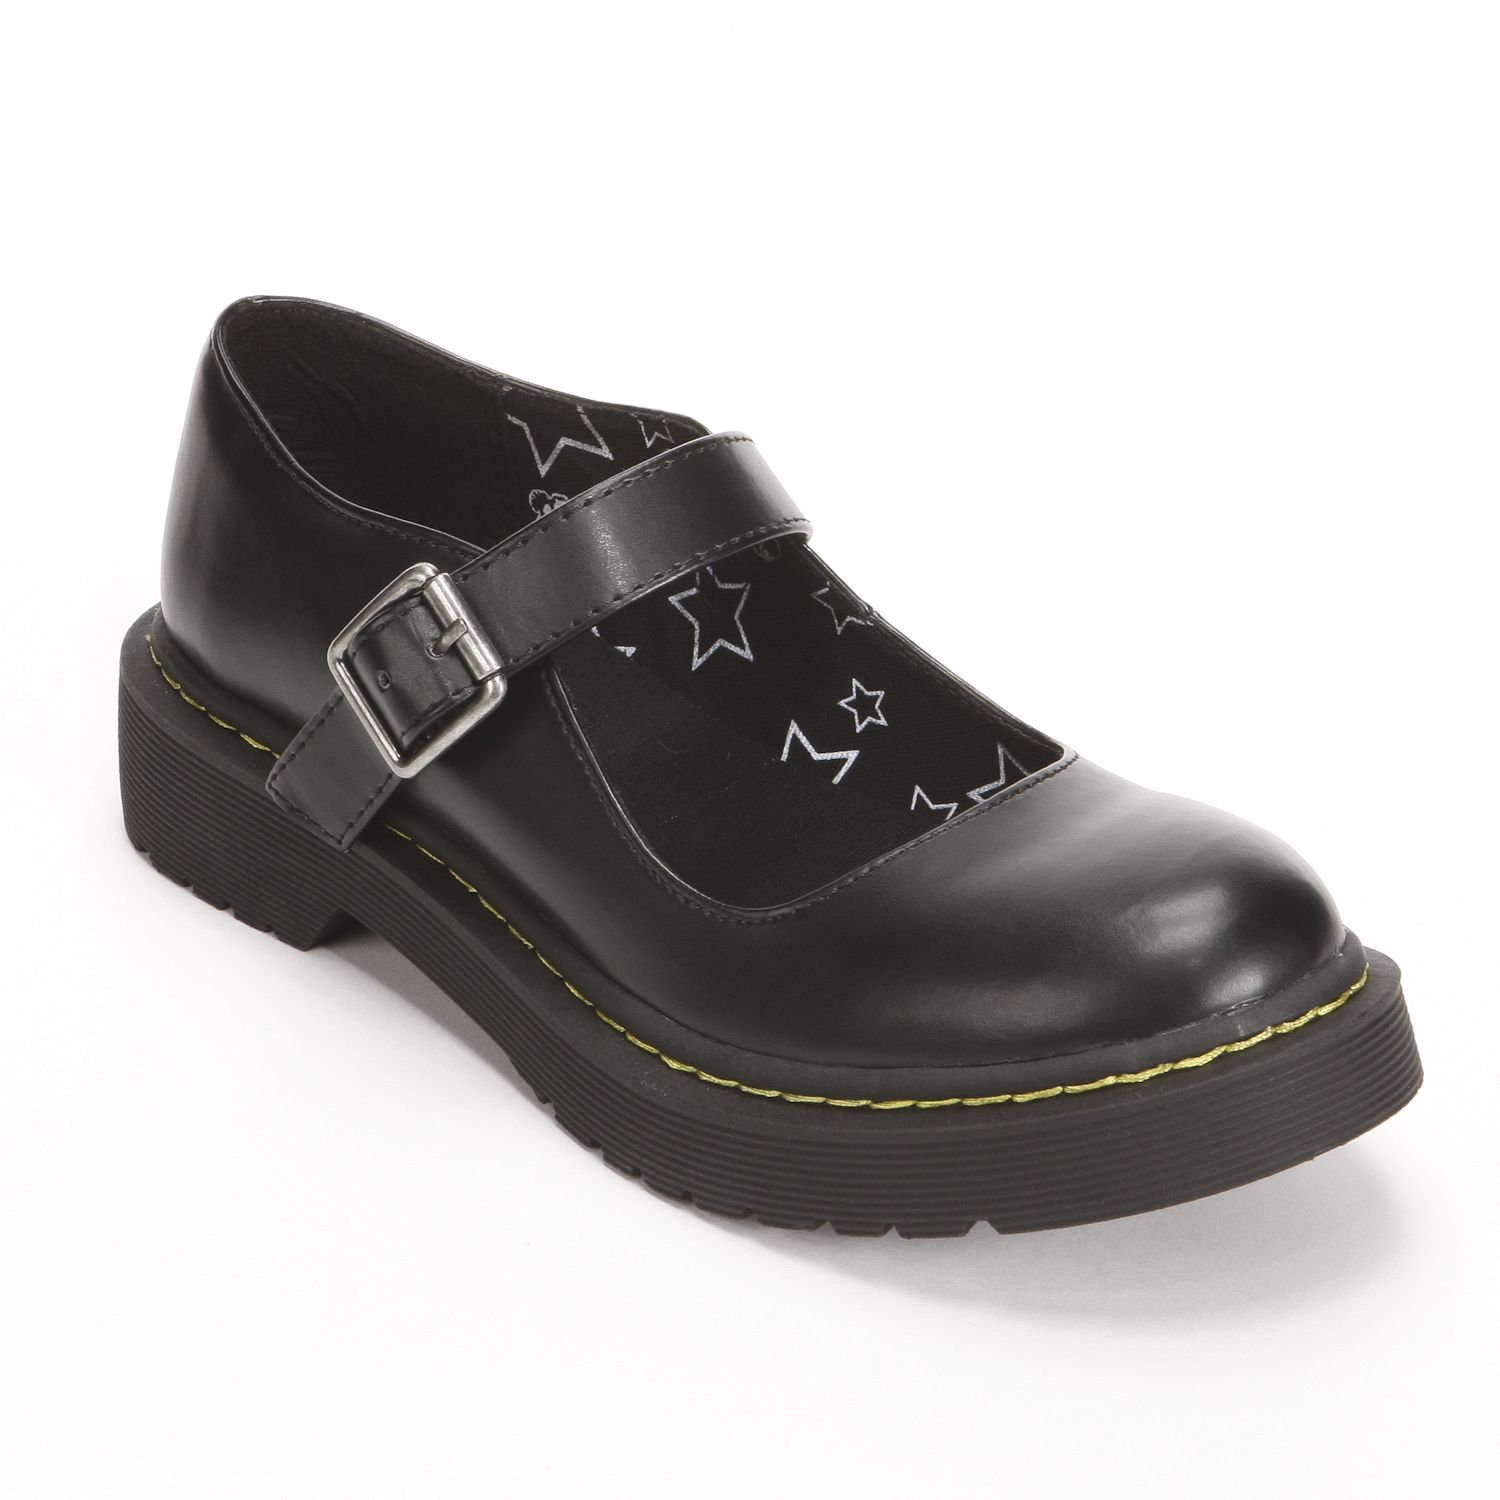 wide width womens shoes canada